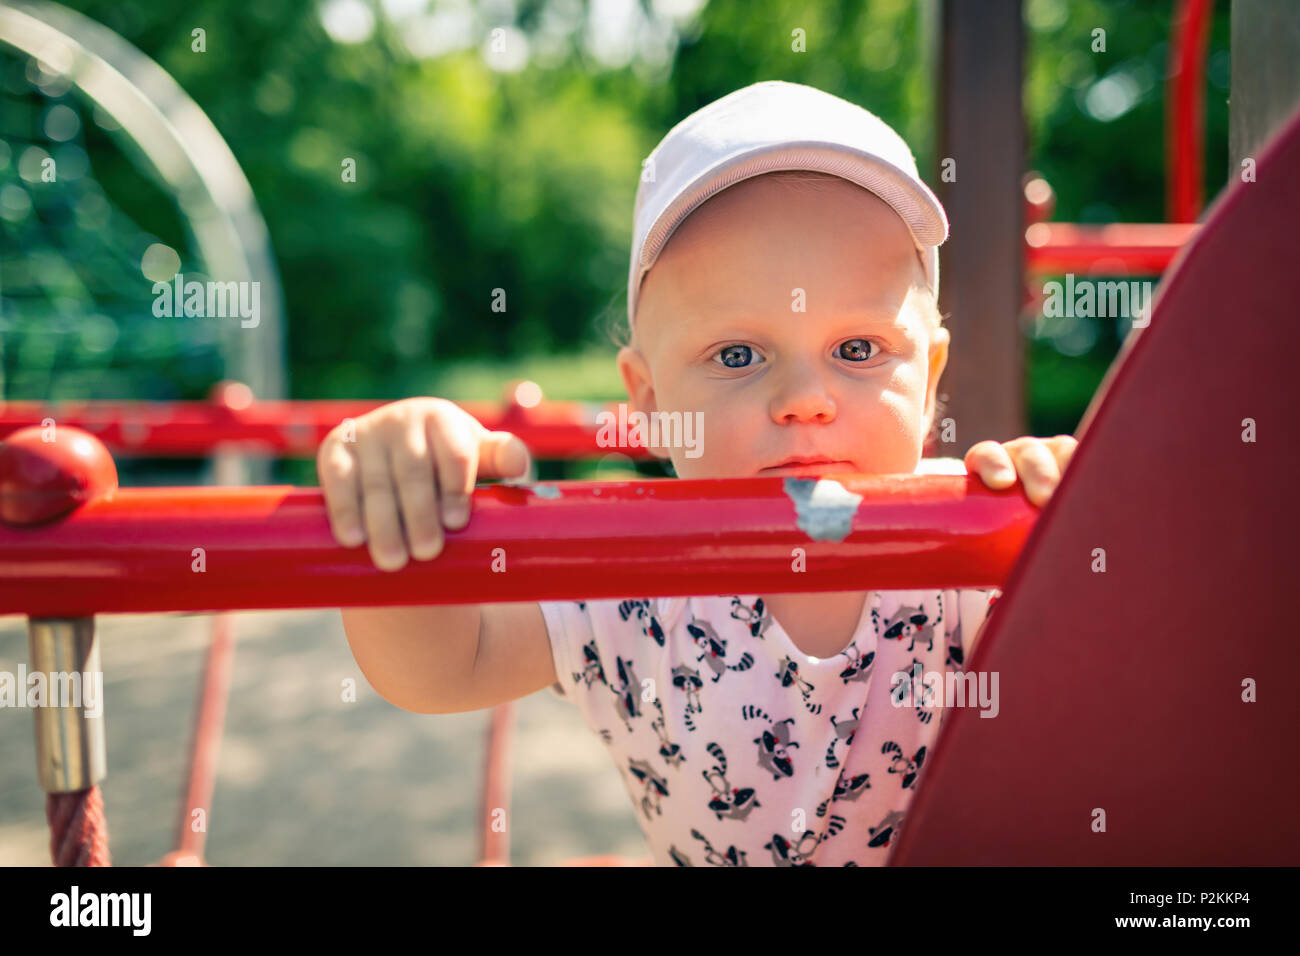 Baby boy playing in playground alone. Portrait of toddler looking at camera with unhappy face. Holding a toy on playground area outdoors. Stock Photo